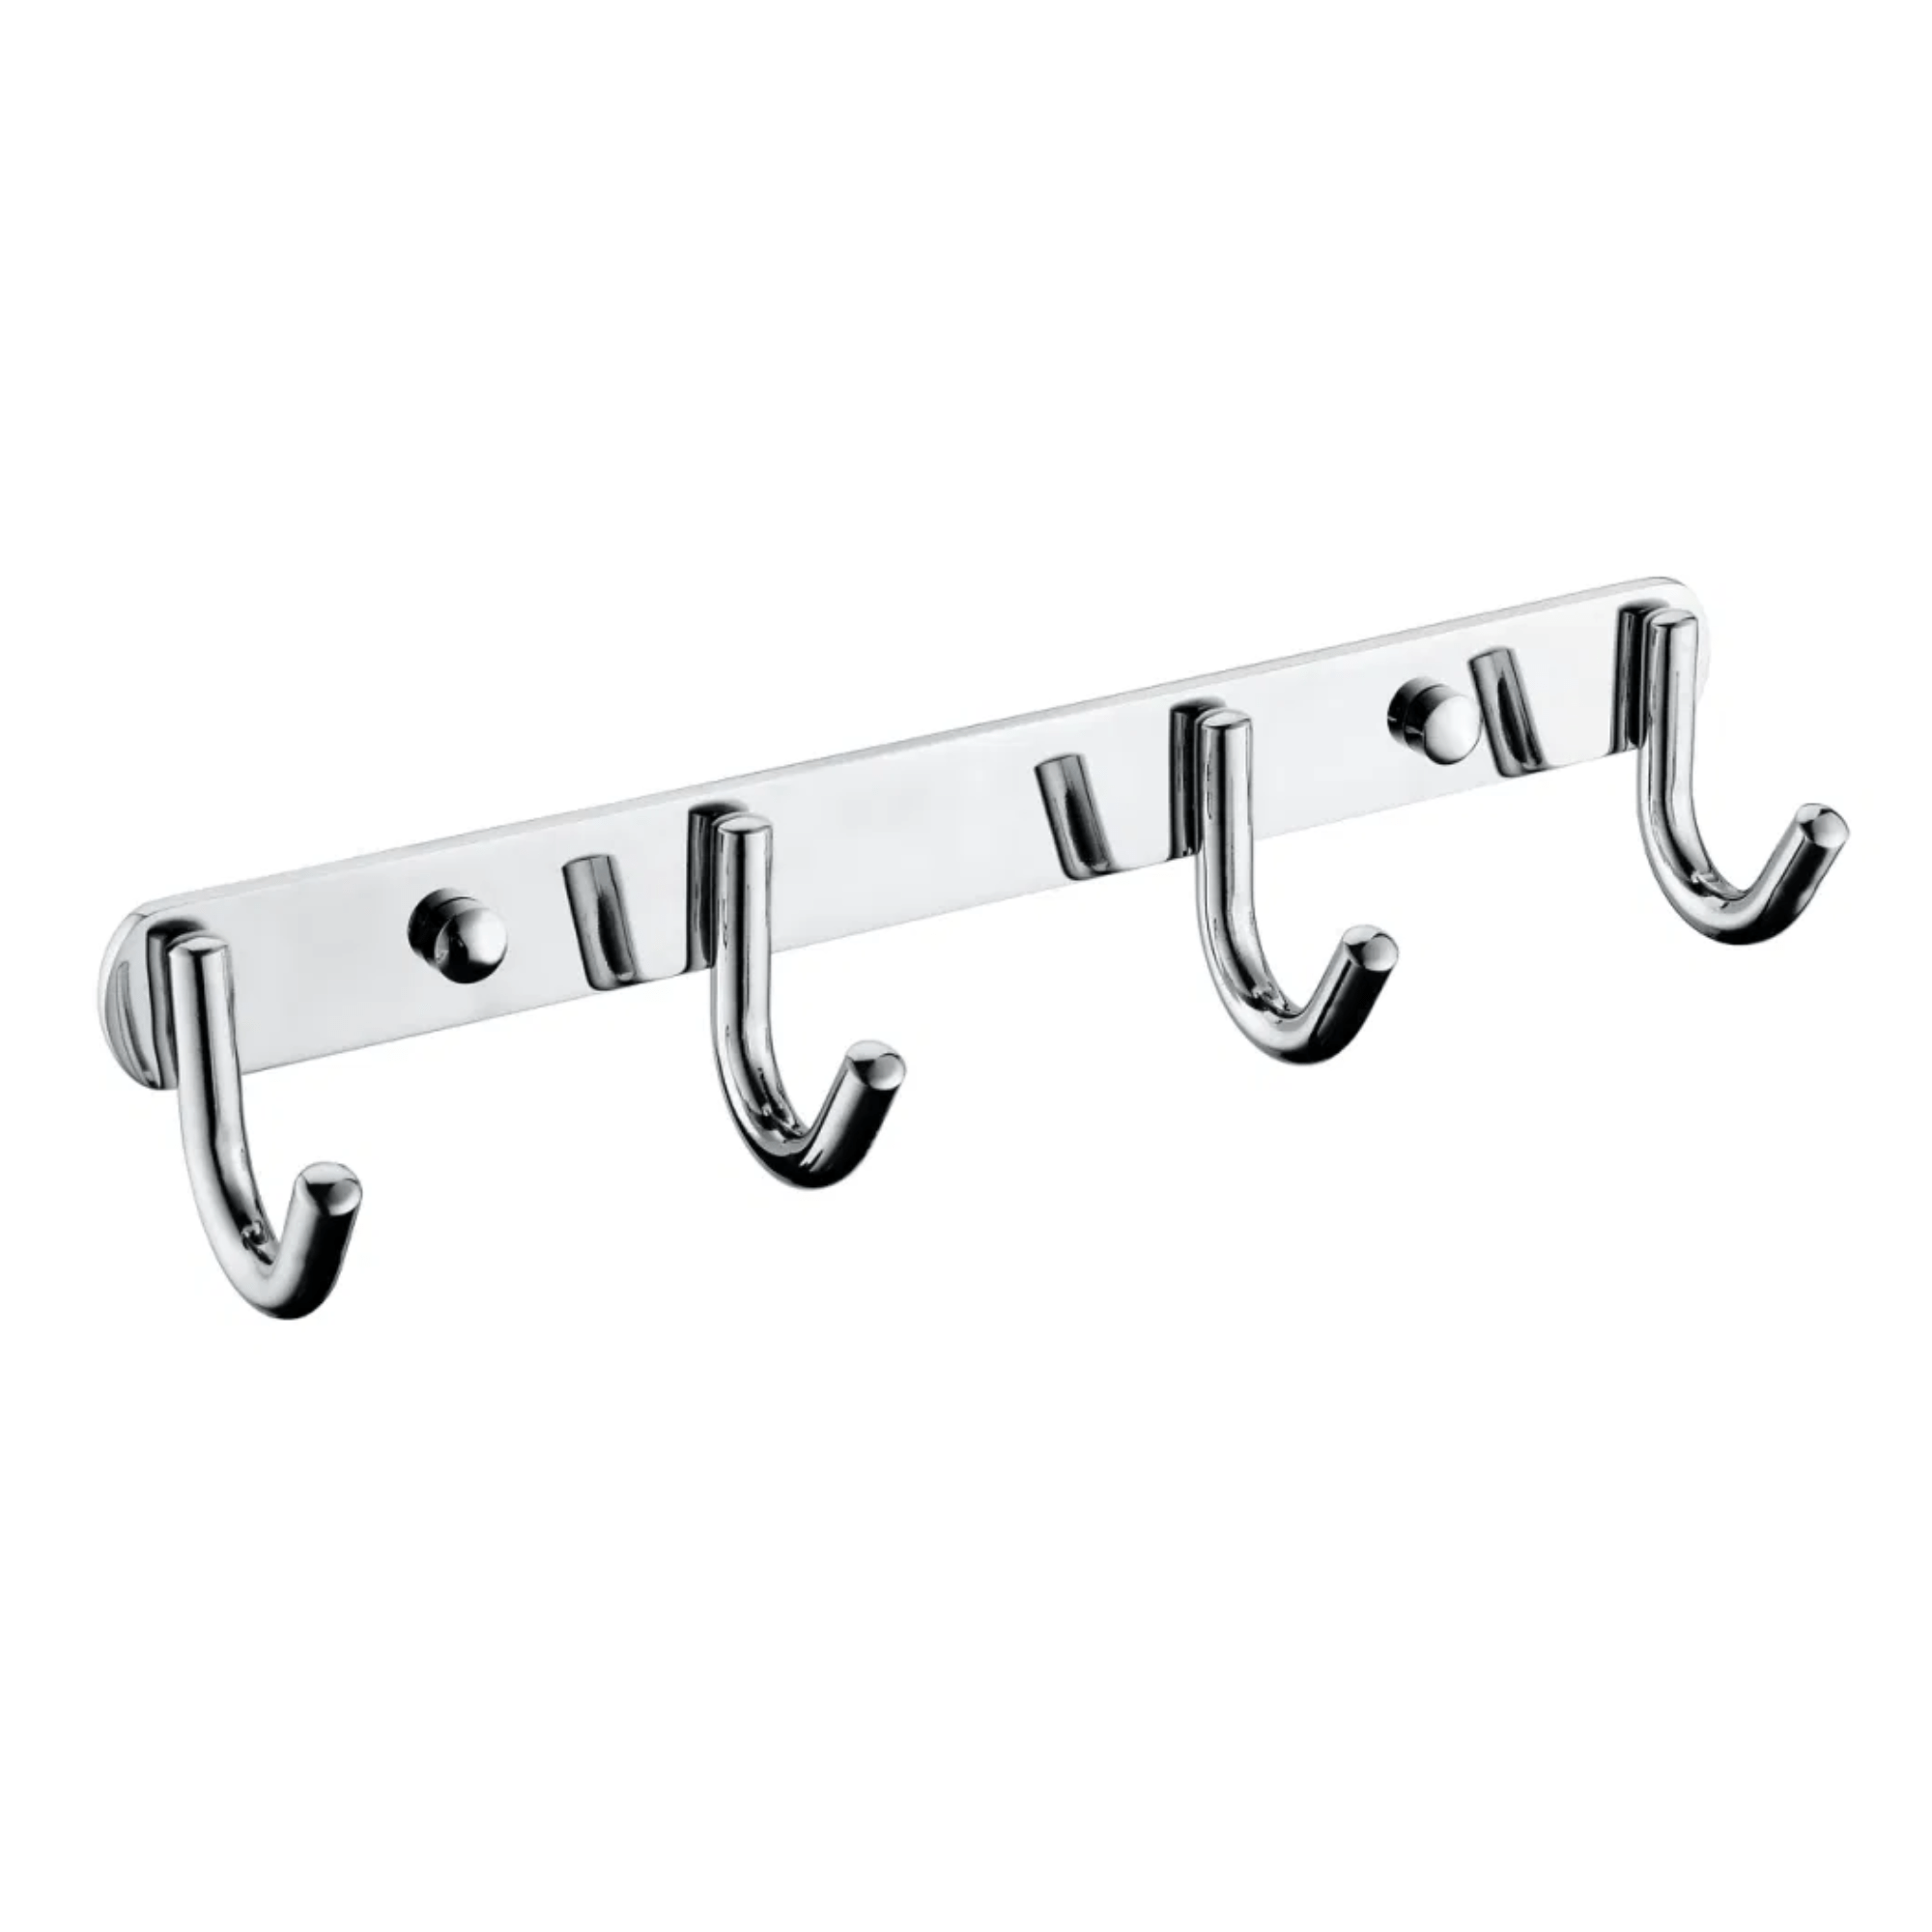 Shop Bathroom Stainless Steel Chrome Hook Rail - 3, 4, or 5 Hooks | Buy Online at Supply Master Accra, Ghana Bathroom Accessories 4-Hooks Buy Tools hardware Building materials